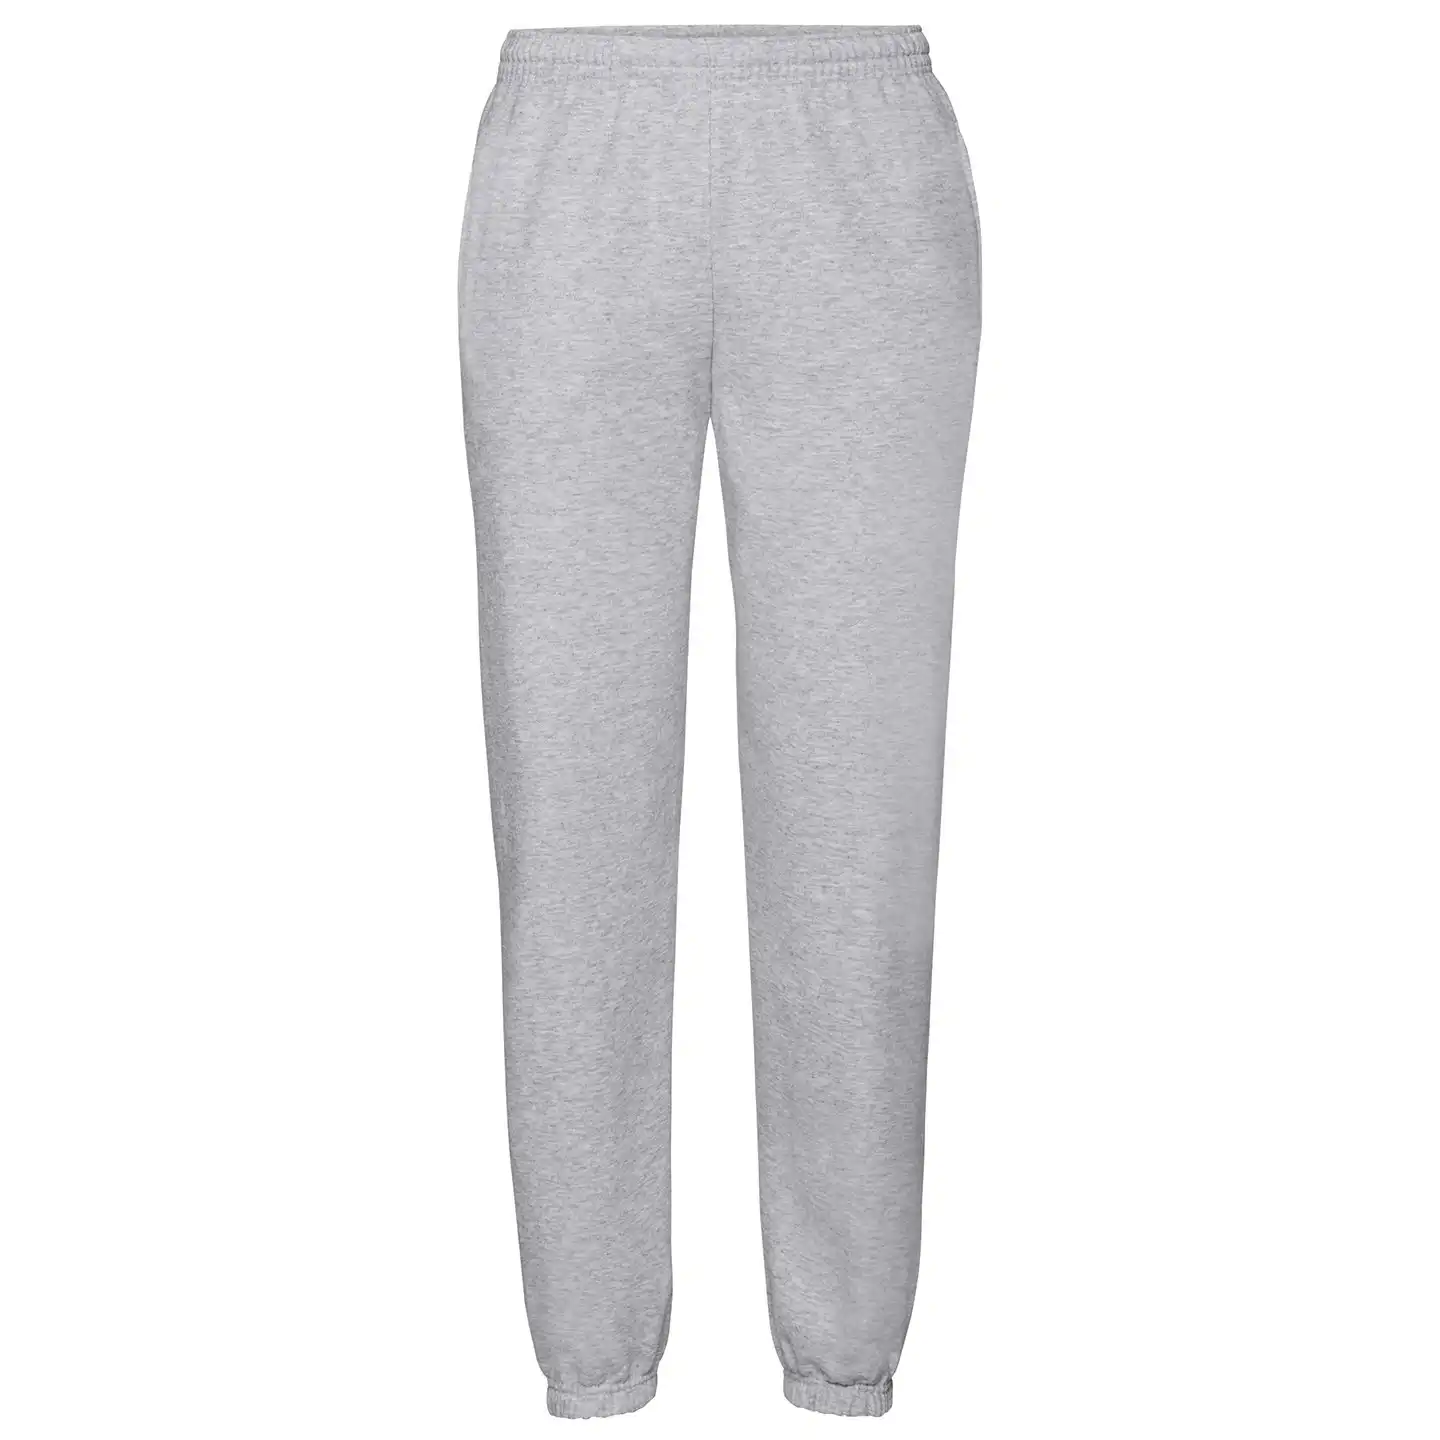 Fruit of the Loom Mens Classic 80/20 Jogging Bottoms